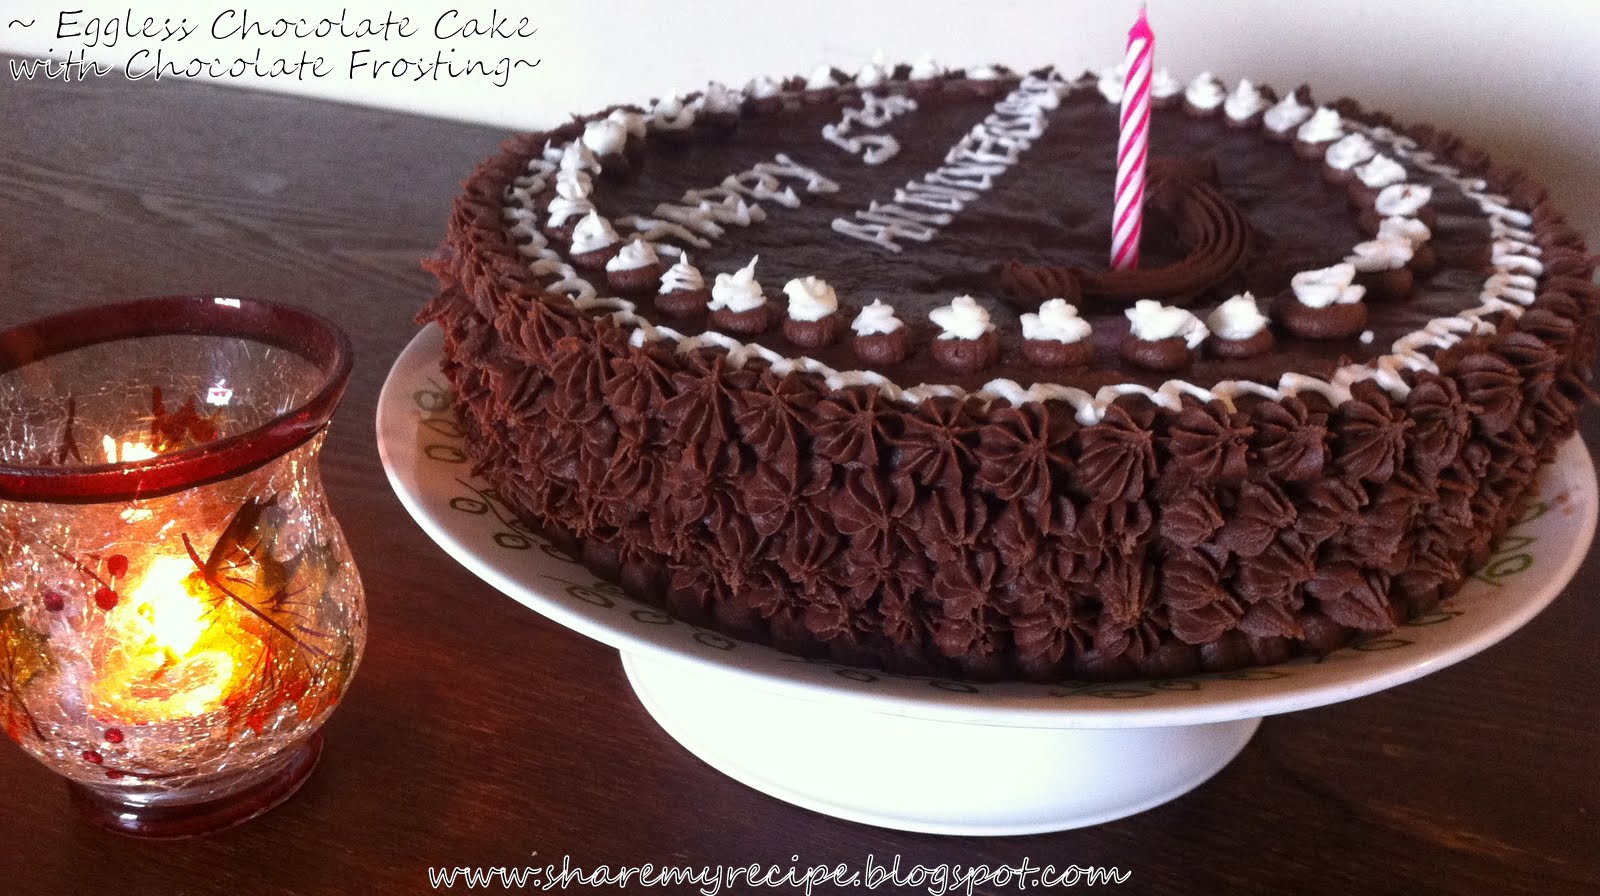 Share My Recipe: Eggless Chocolate Cake with Chocolate Frosting